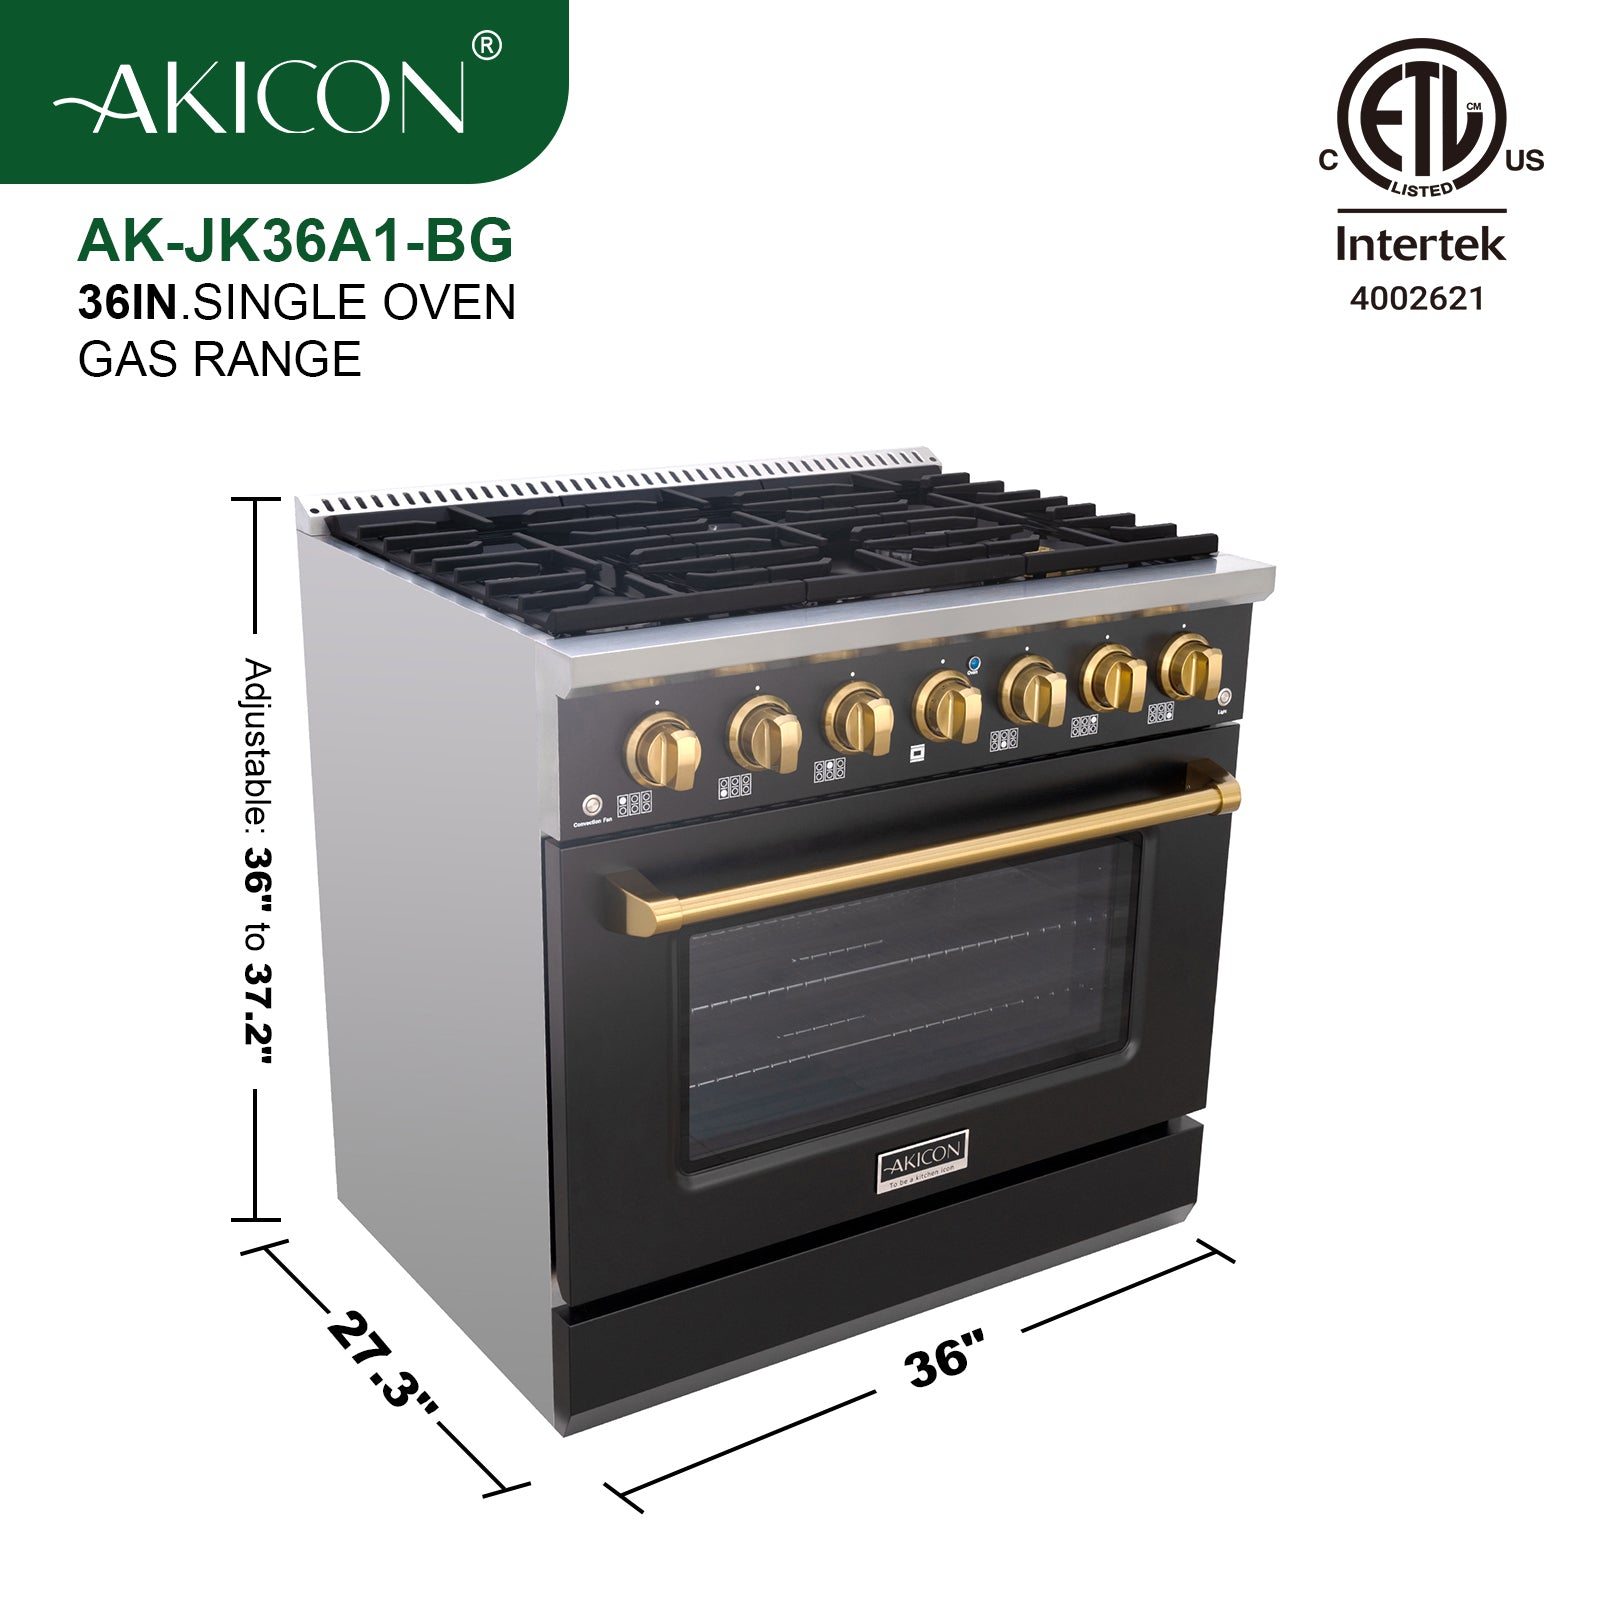 Akicon 36" Slide-in Freestanding Professional Style Gas Range with 5.2 Cu. Ft. Oven, 6 Burners, Convection Fan, Cast Iron Grates. Black & Gold